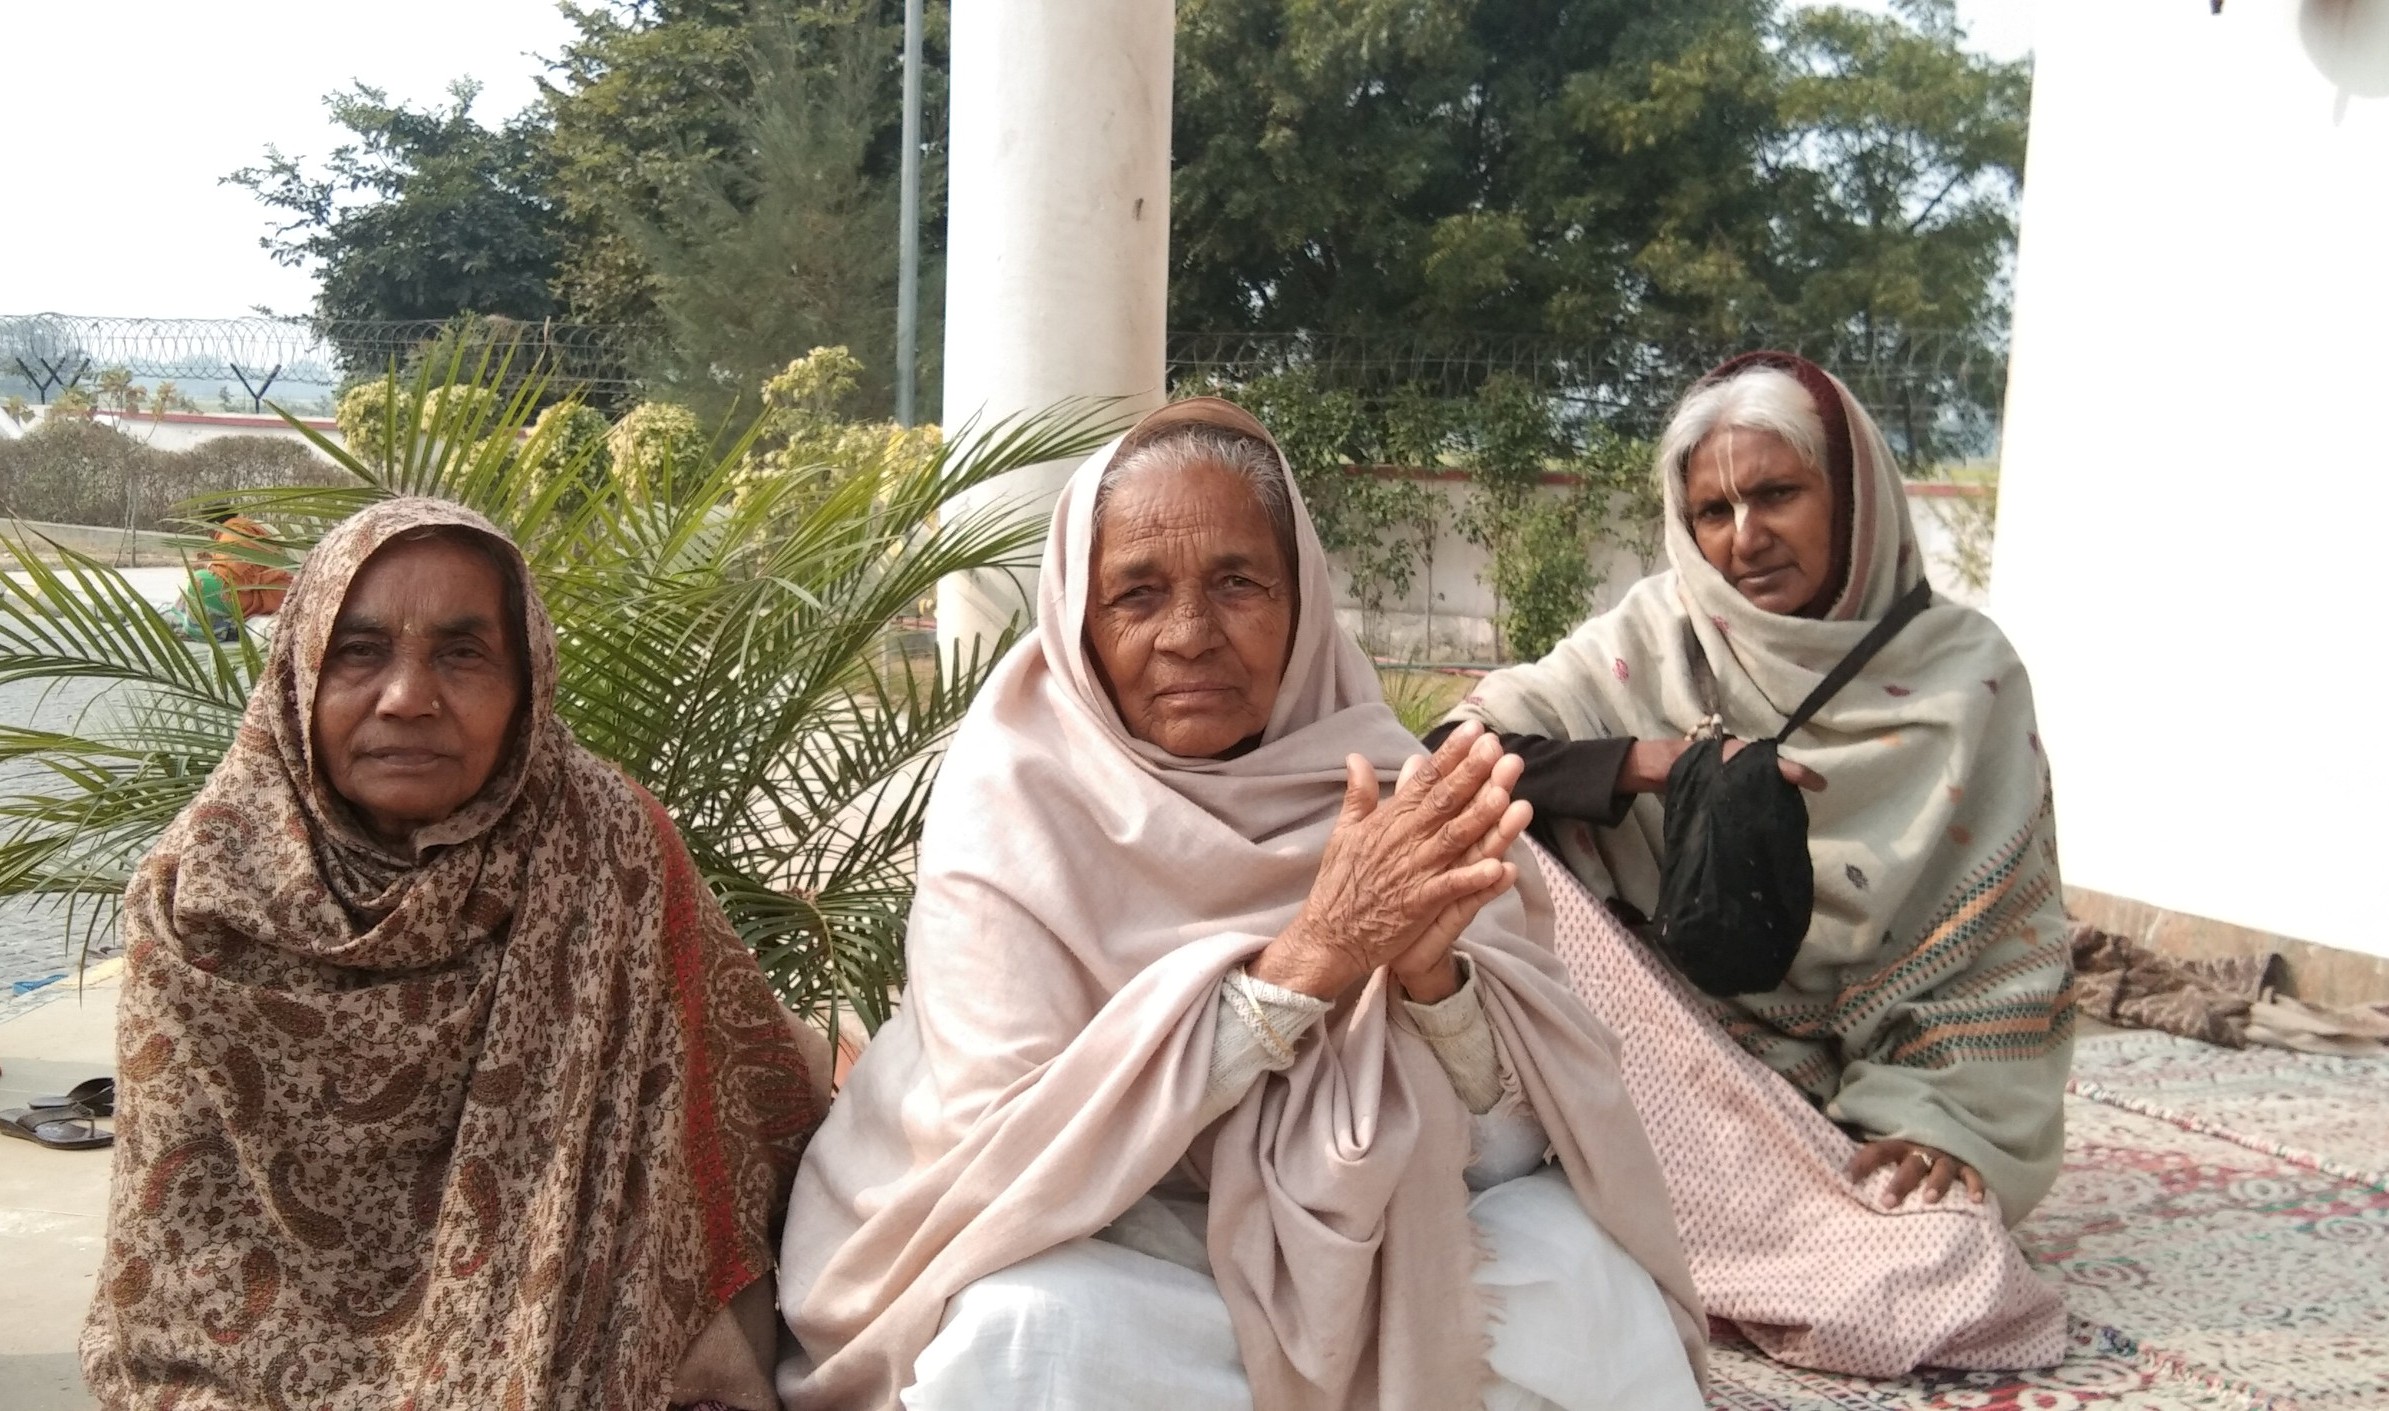 Mystery shrouds the Tragic Deaths of widows in Vrindavan